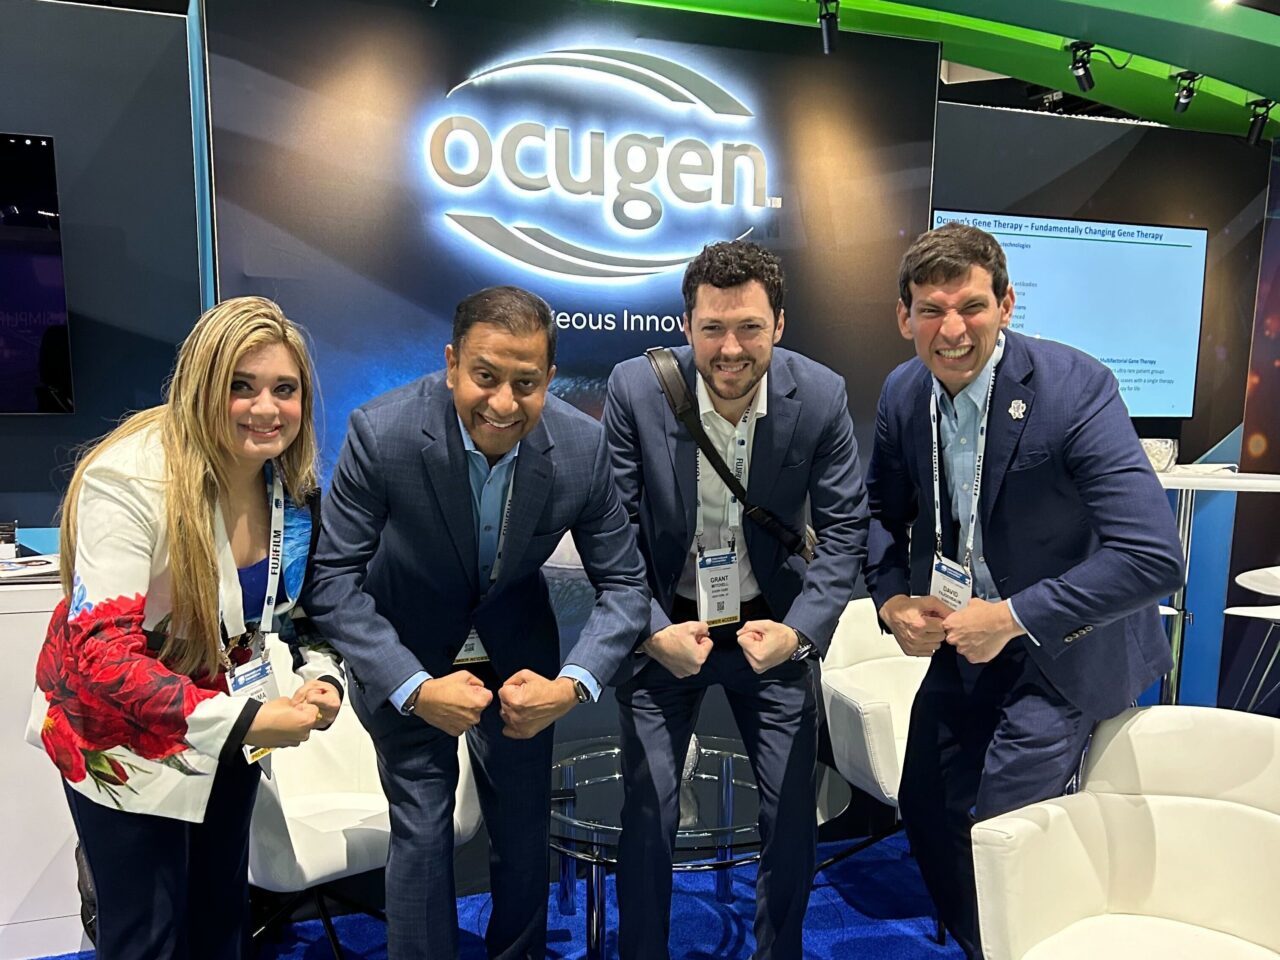 David Fajgenbaum: So great to connect with so many leaders last week at I Am Biotech!